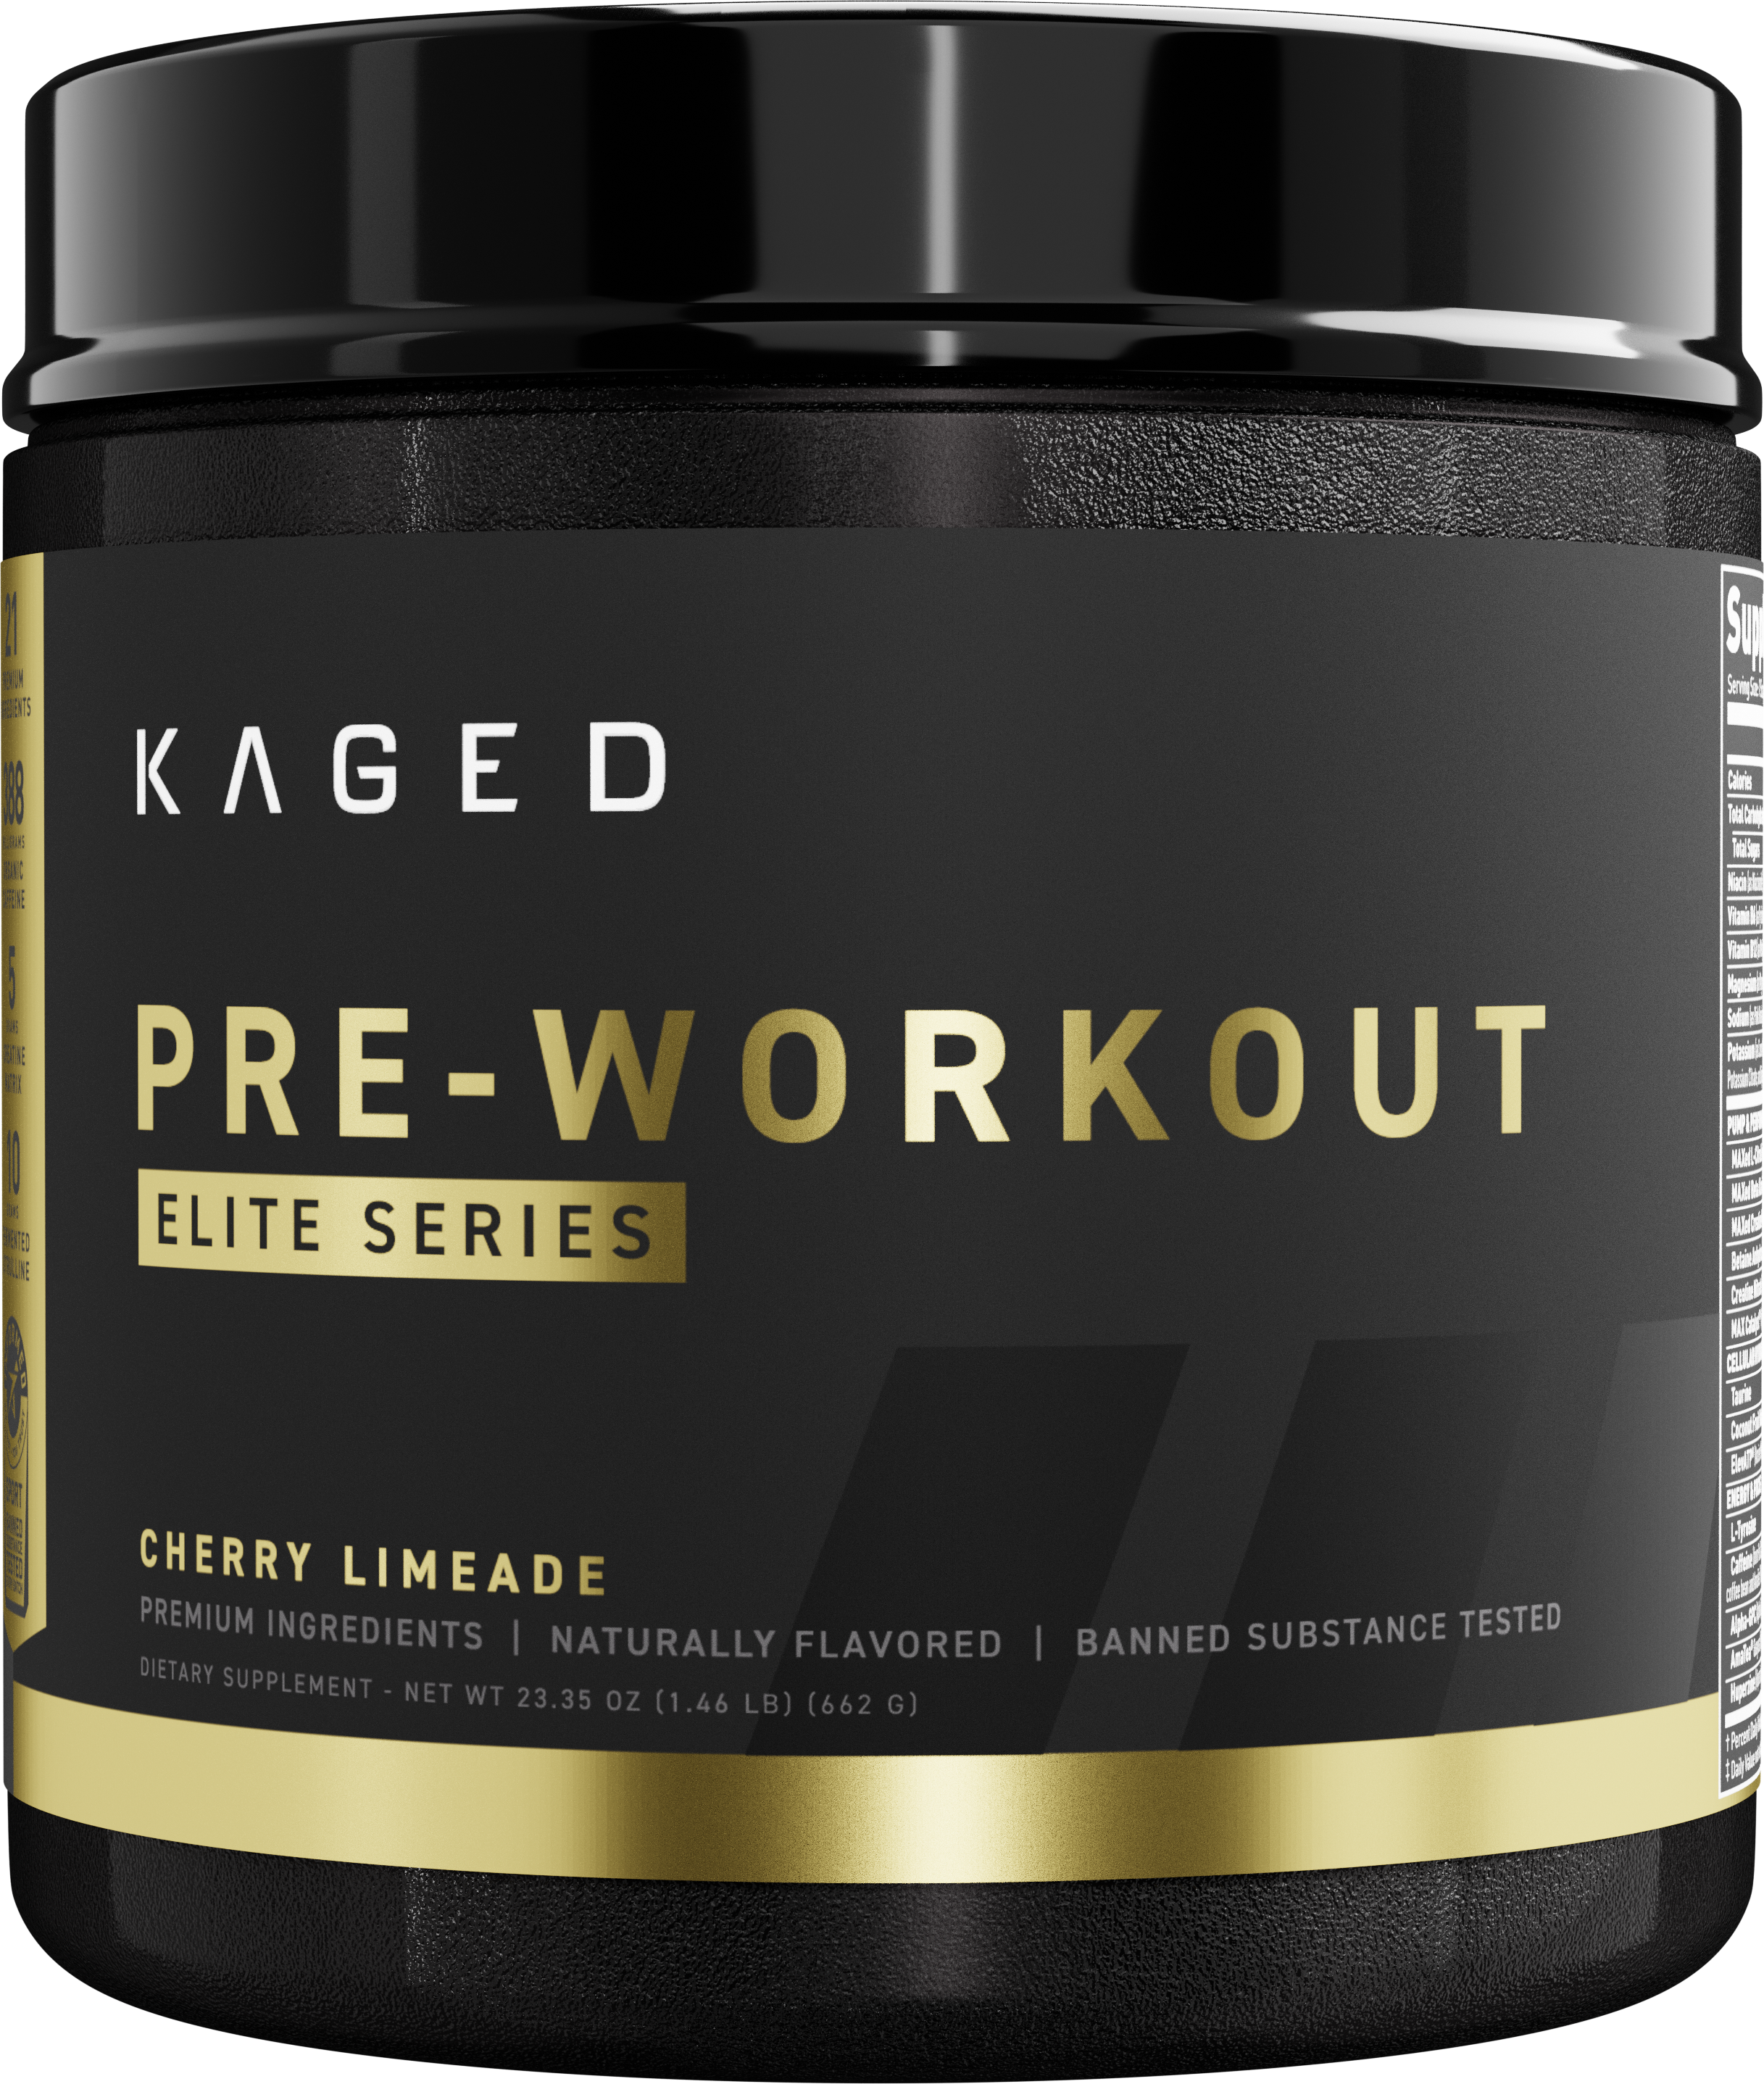 https://www.priceplow.com/static/images/products/kaged-pre-workout-elite-series.png